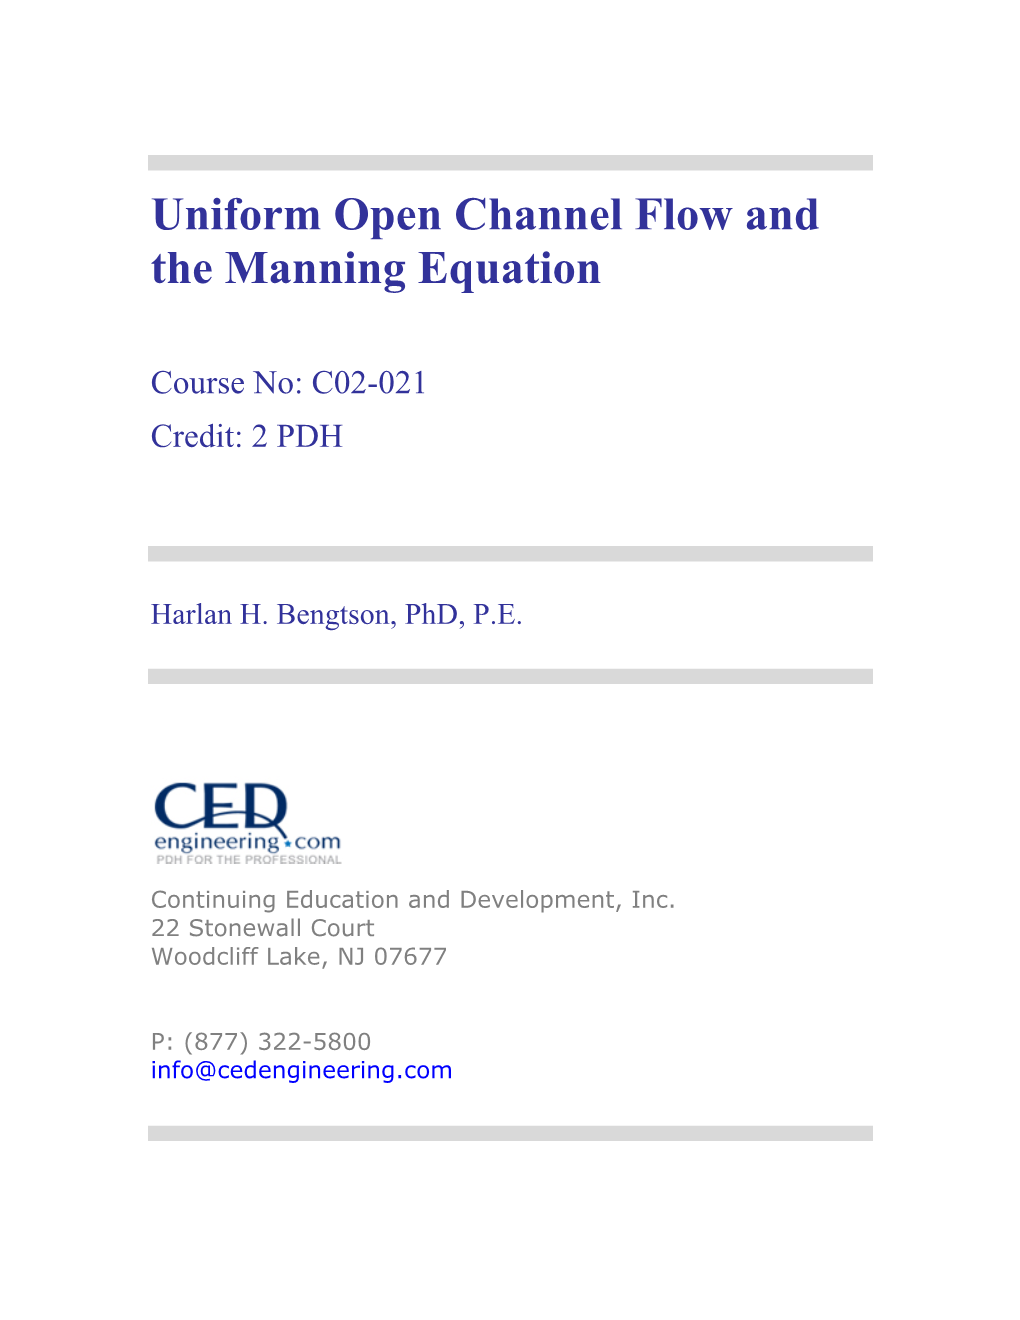 Uniform Open Channel Flow and the Manning Equation